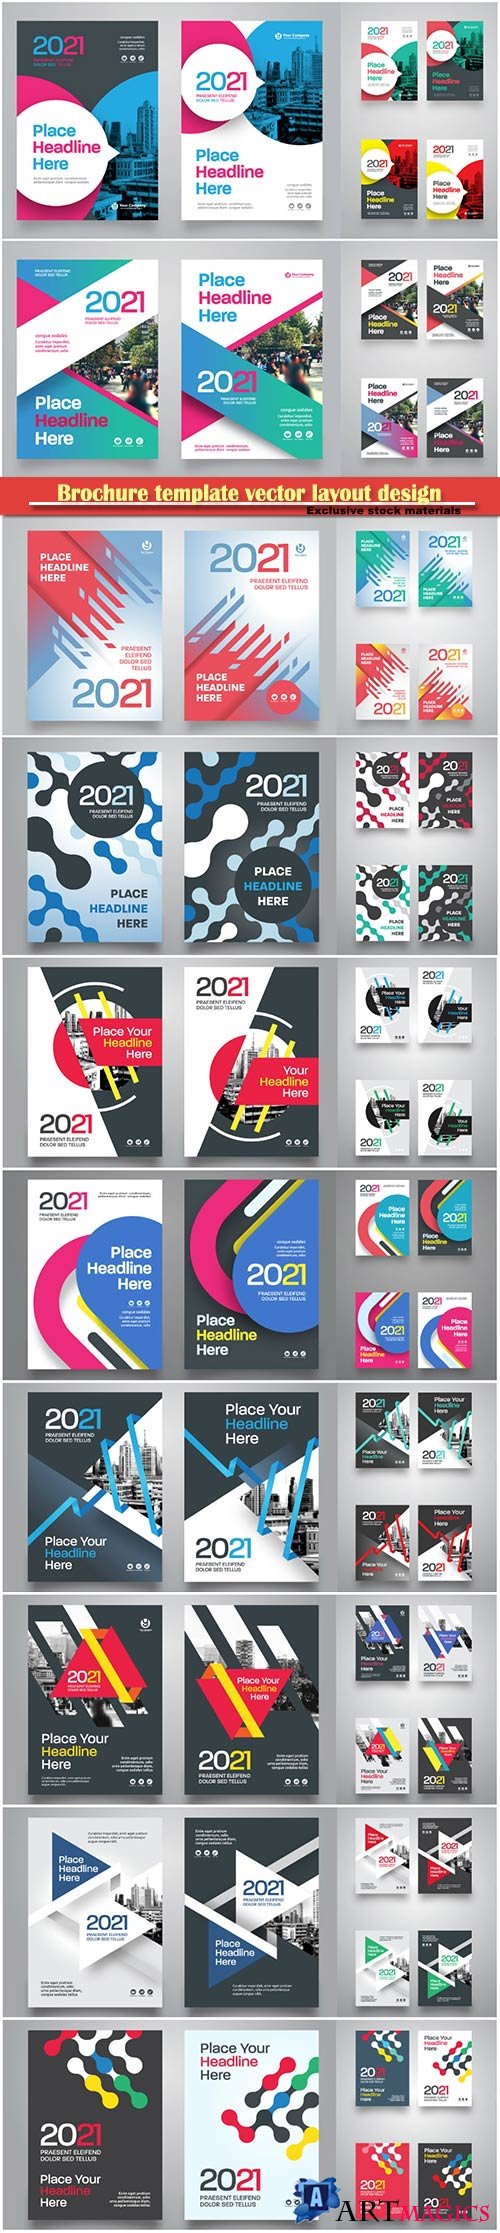 Brochure template vector layout design, corporate business annual report, magazine, flyer mockup # 145